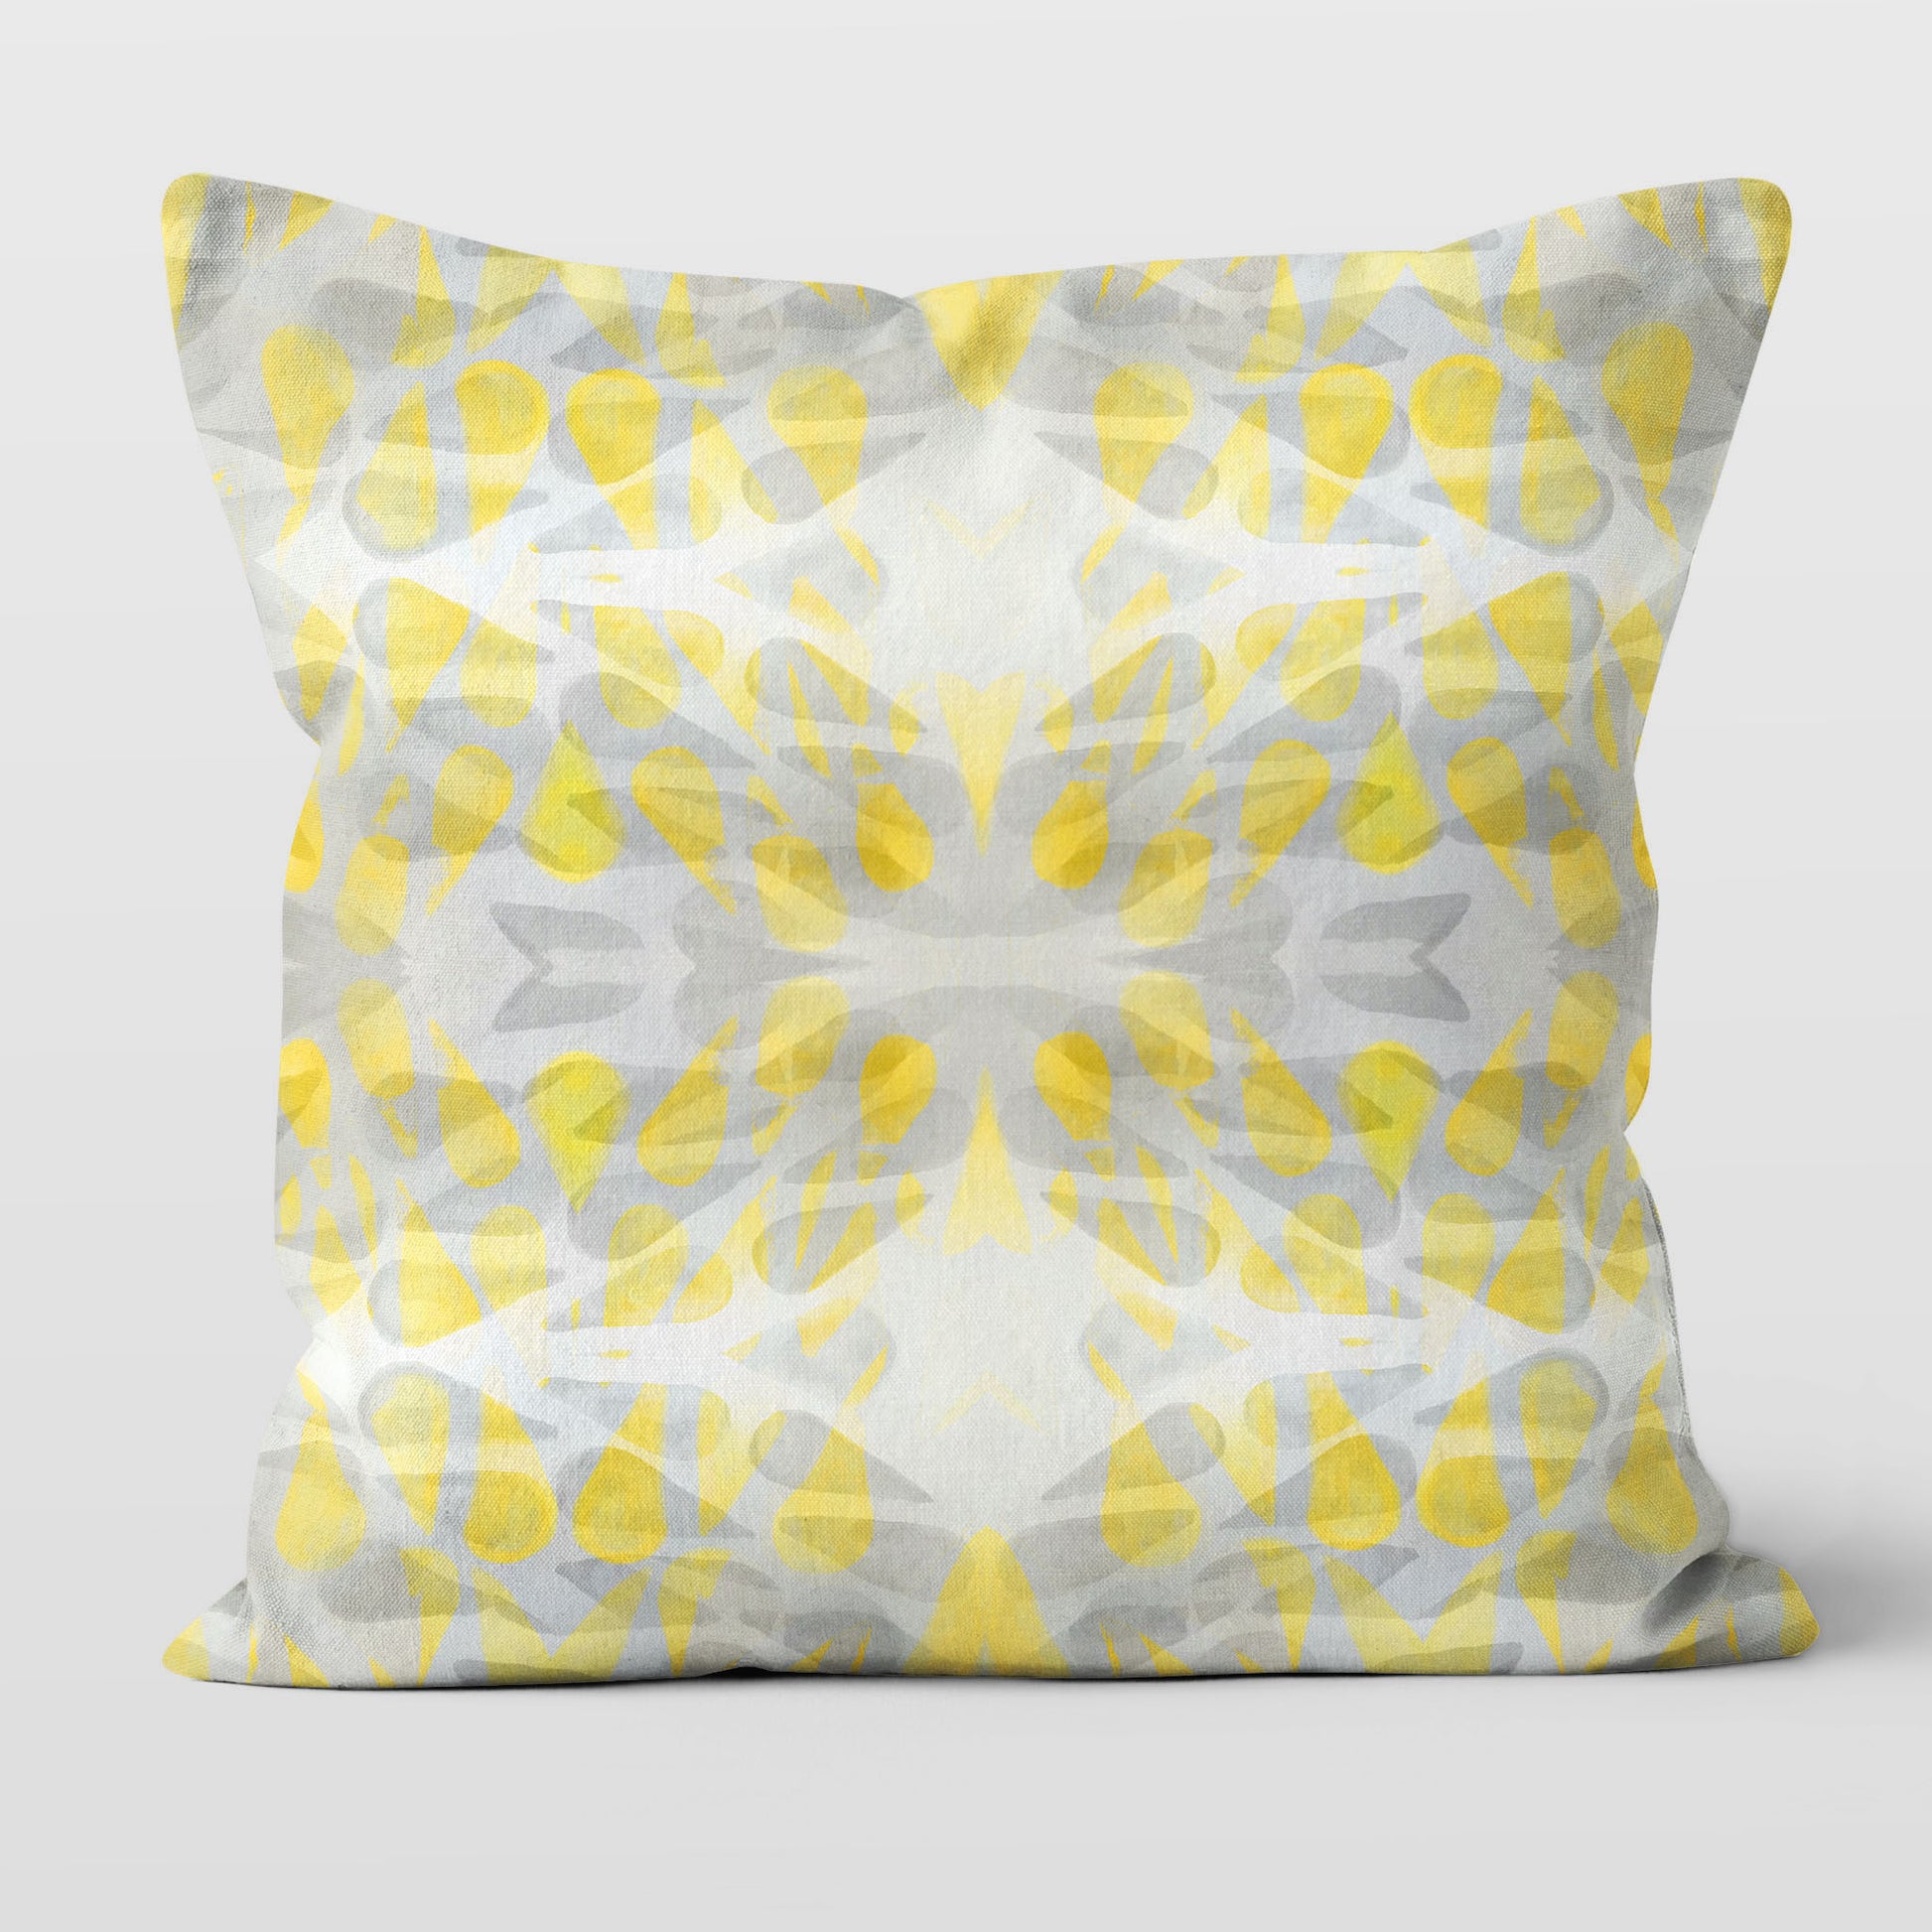 Throw pillow featuring abstract hand-painted pattern in yellow and grey.